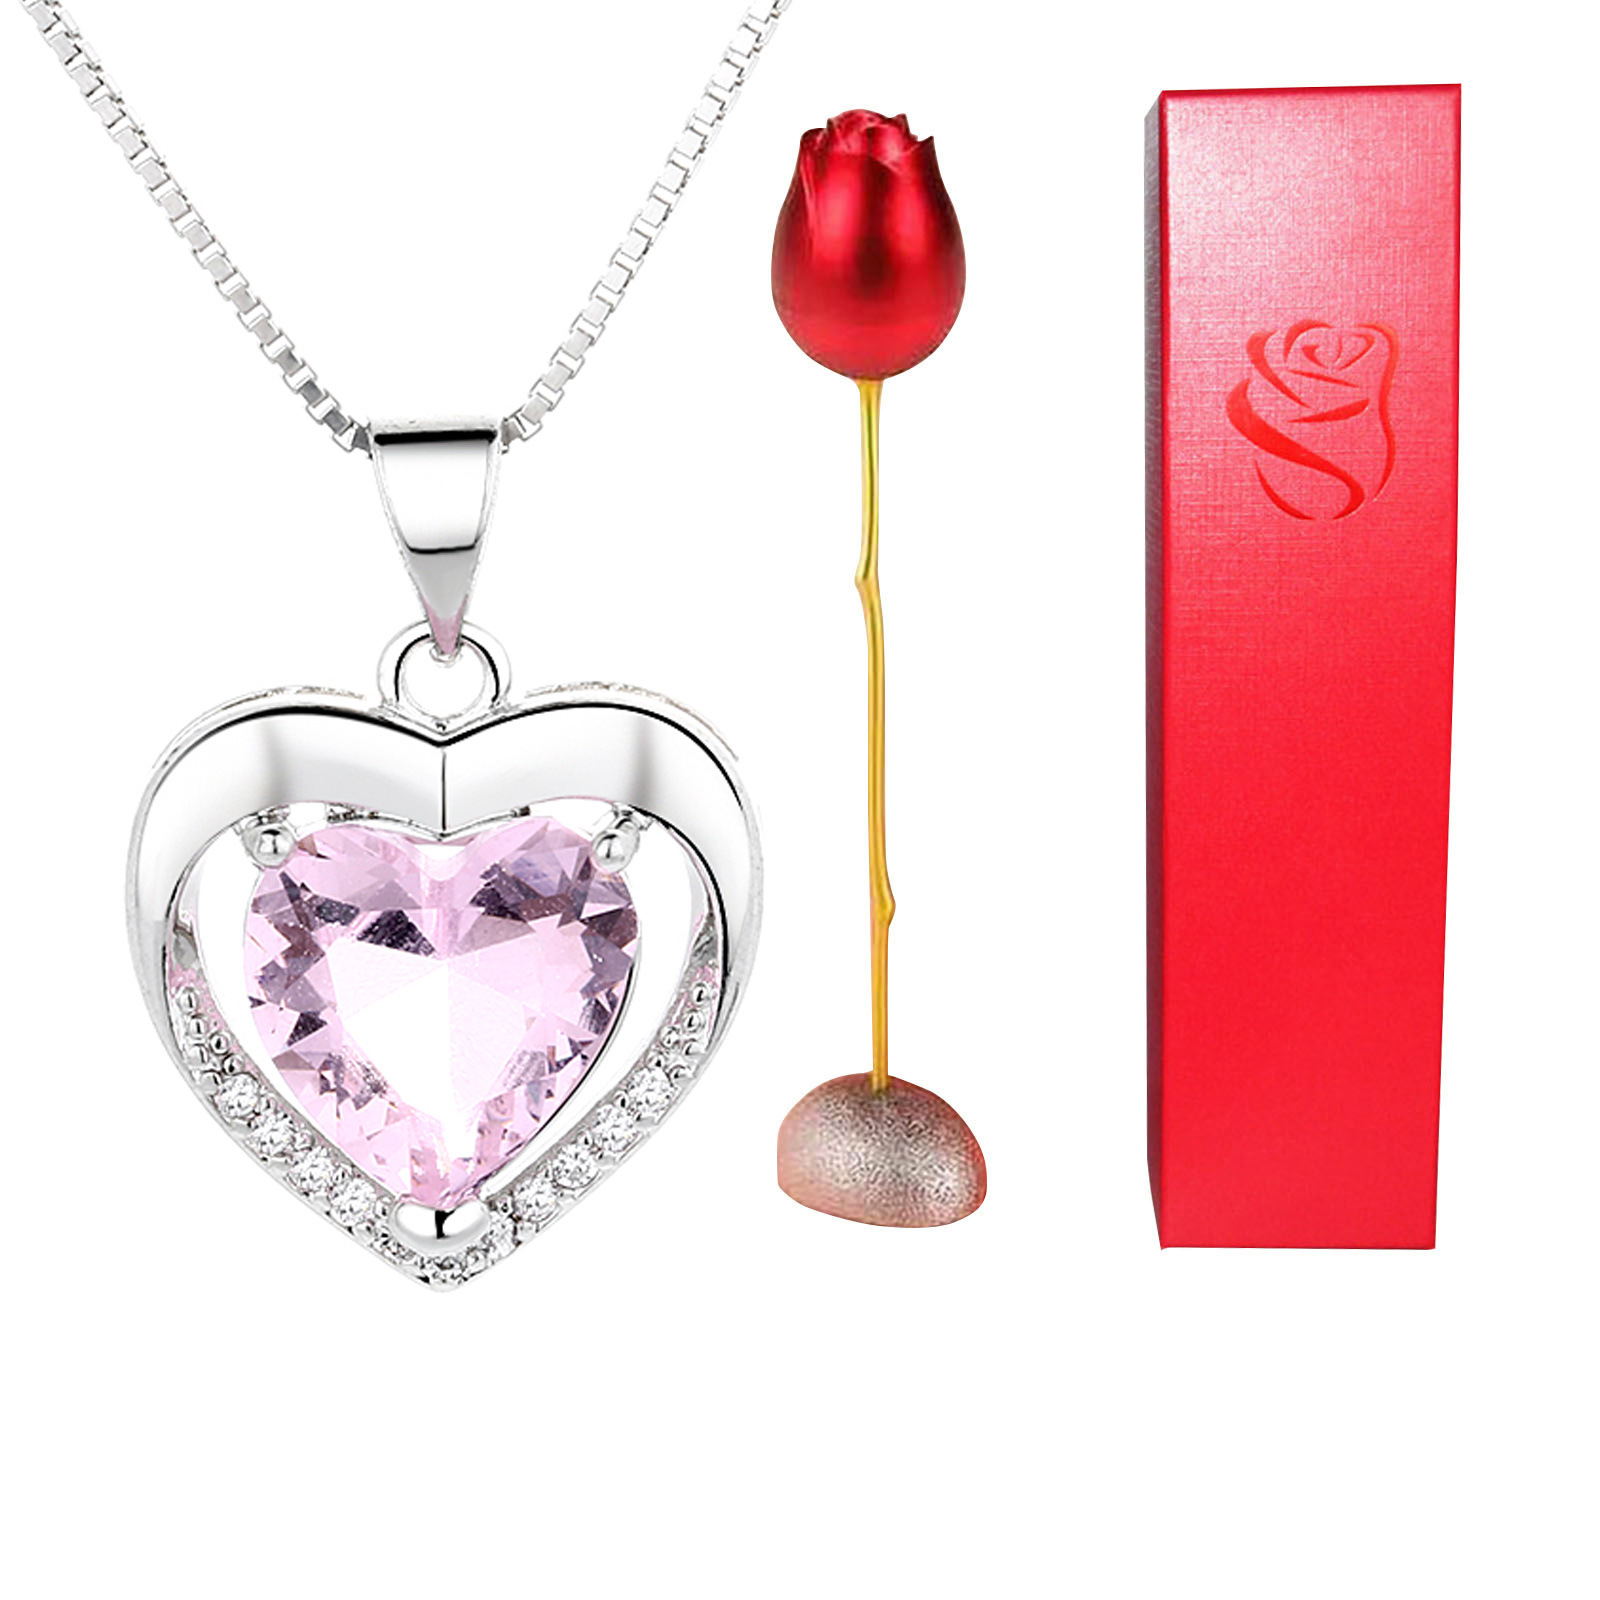 Rose and Pendant Gift Pack 11